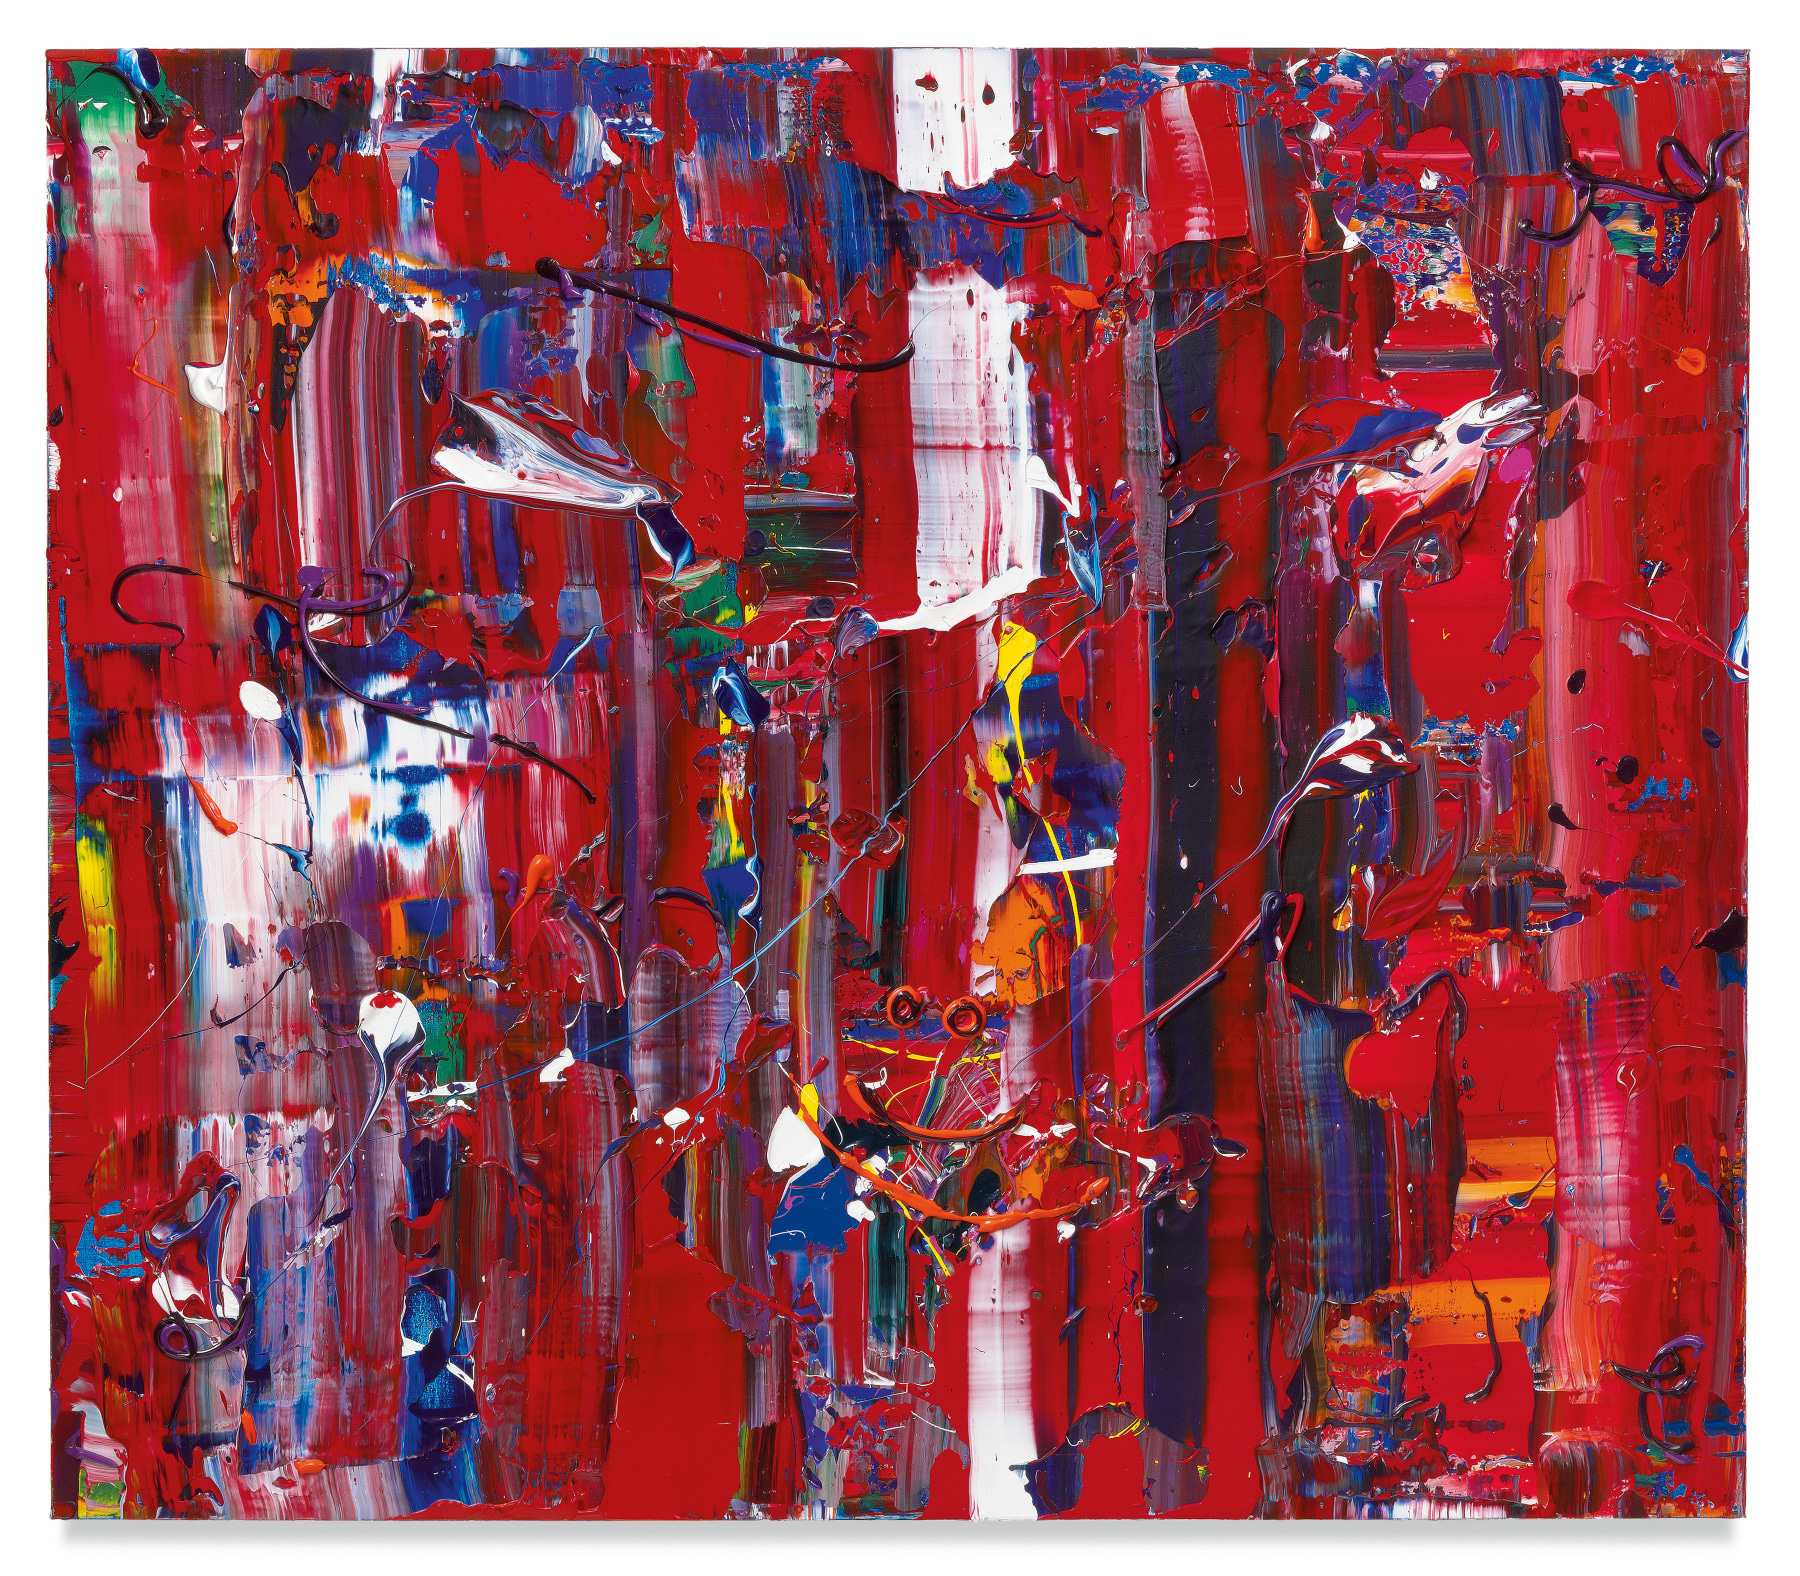 Michael Reafsnyder, Red Rocket, 2019, Acrylic on linen